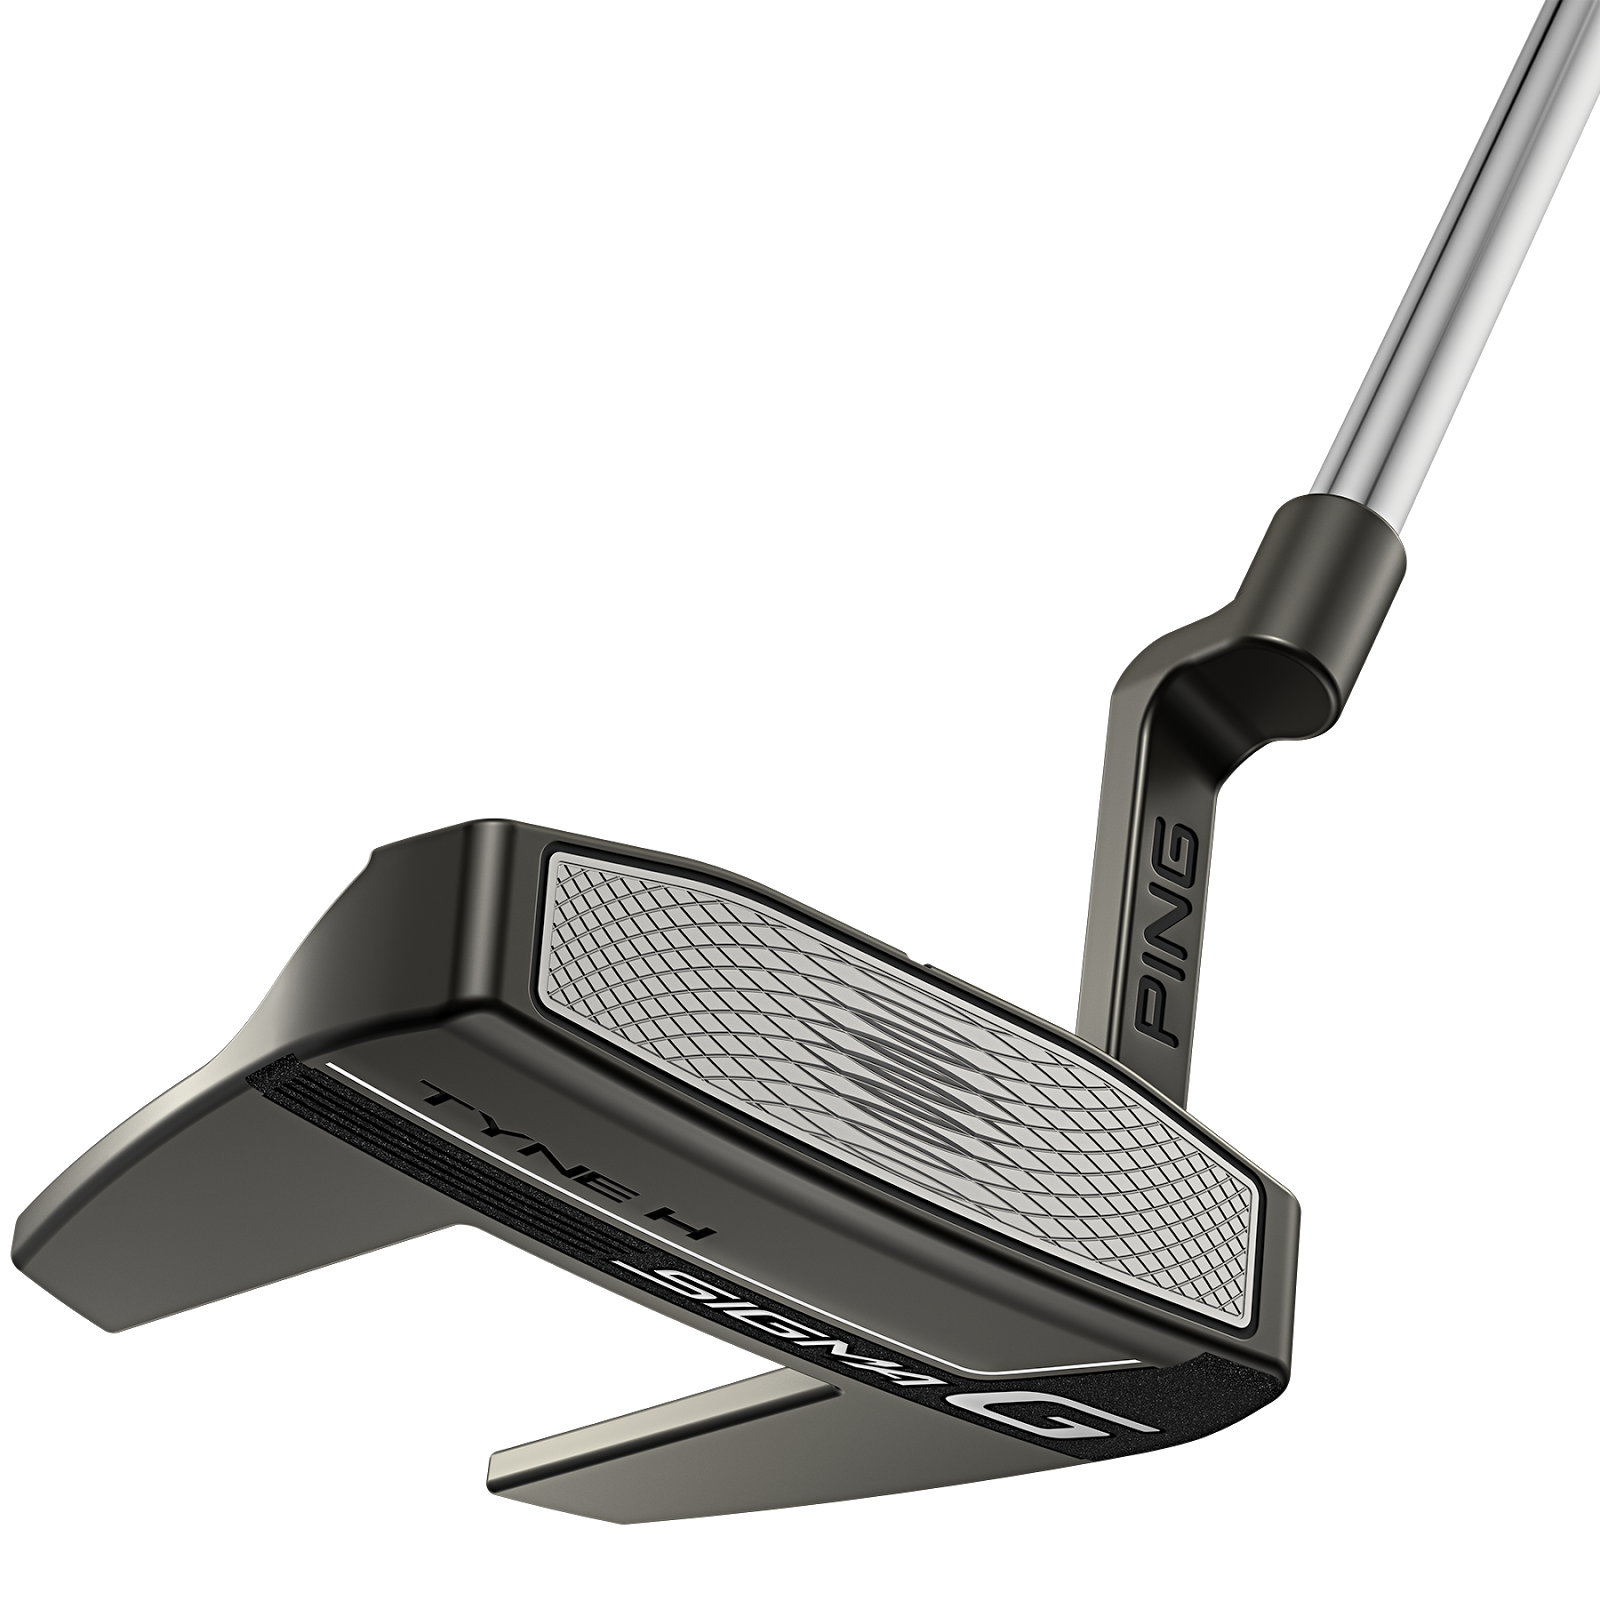 American Golfer: PING Introduces New Sigma G Putter Models